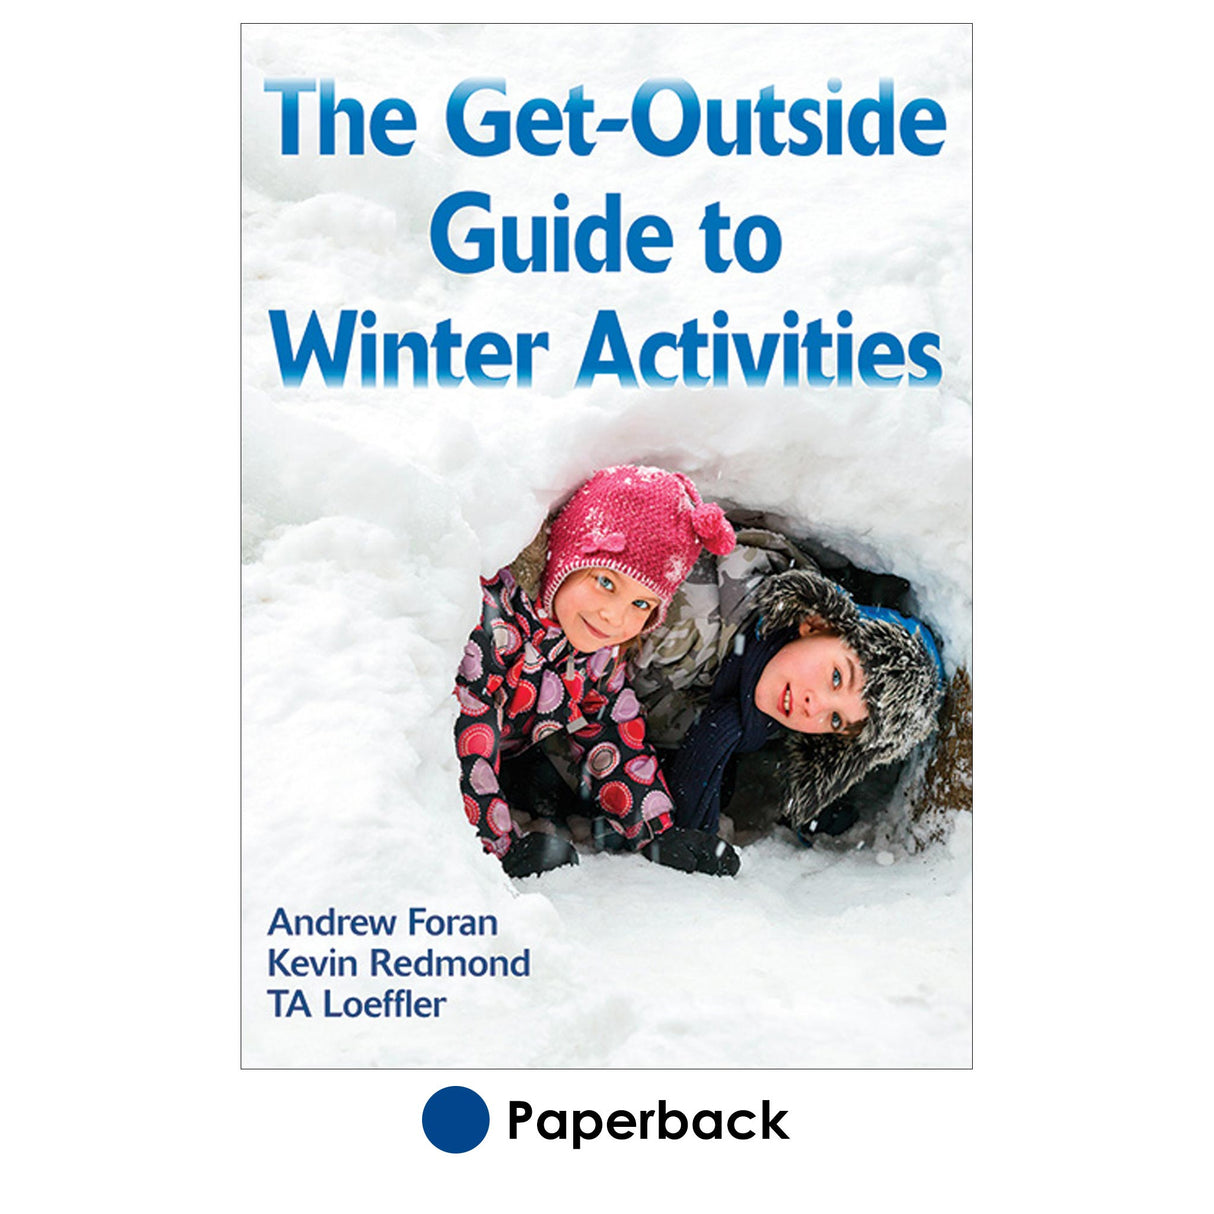 Get-Outside Guide to Winter Activities, The